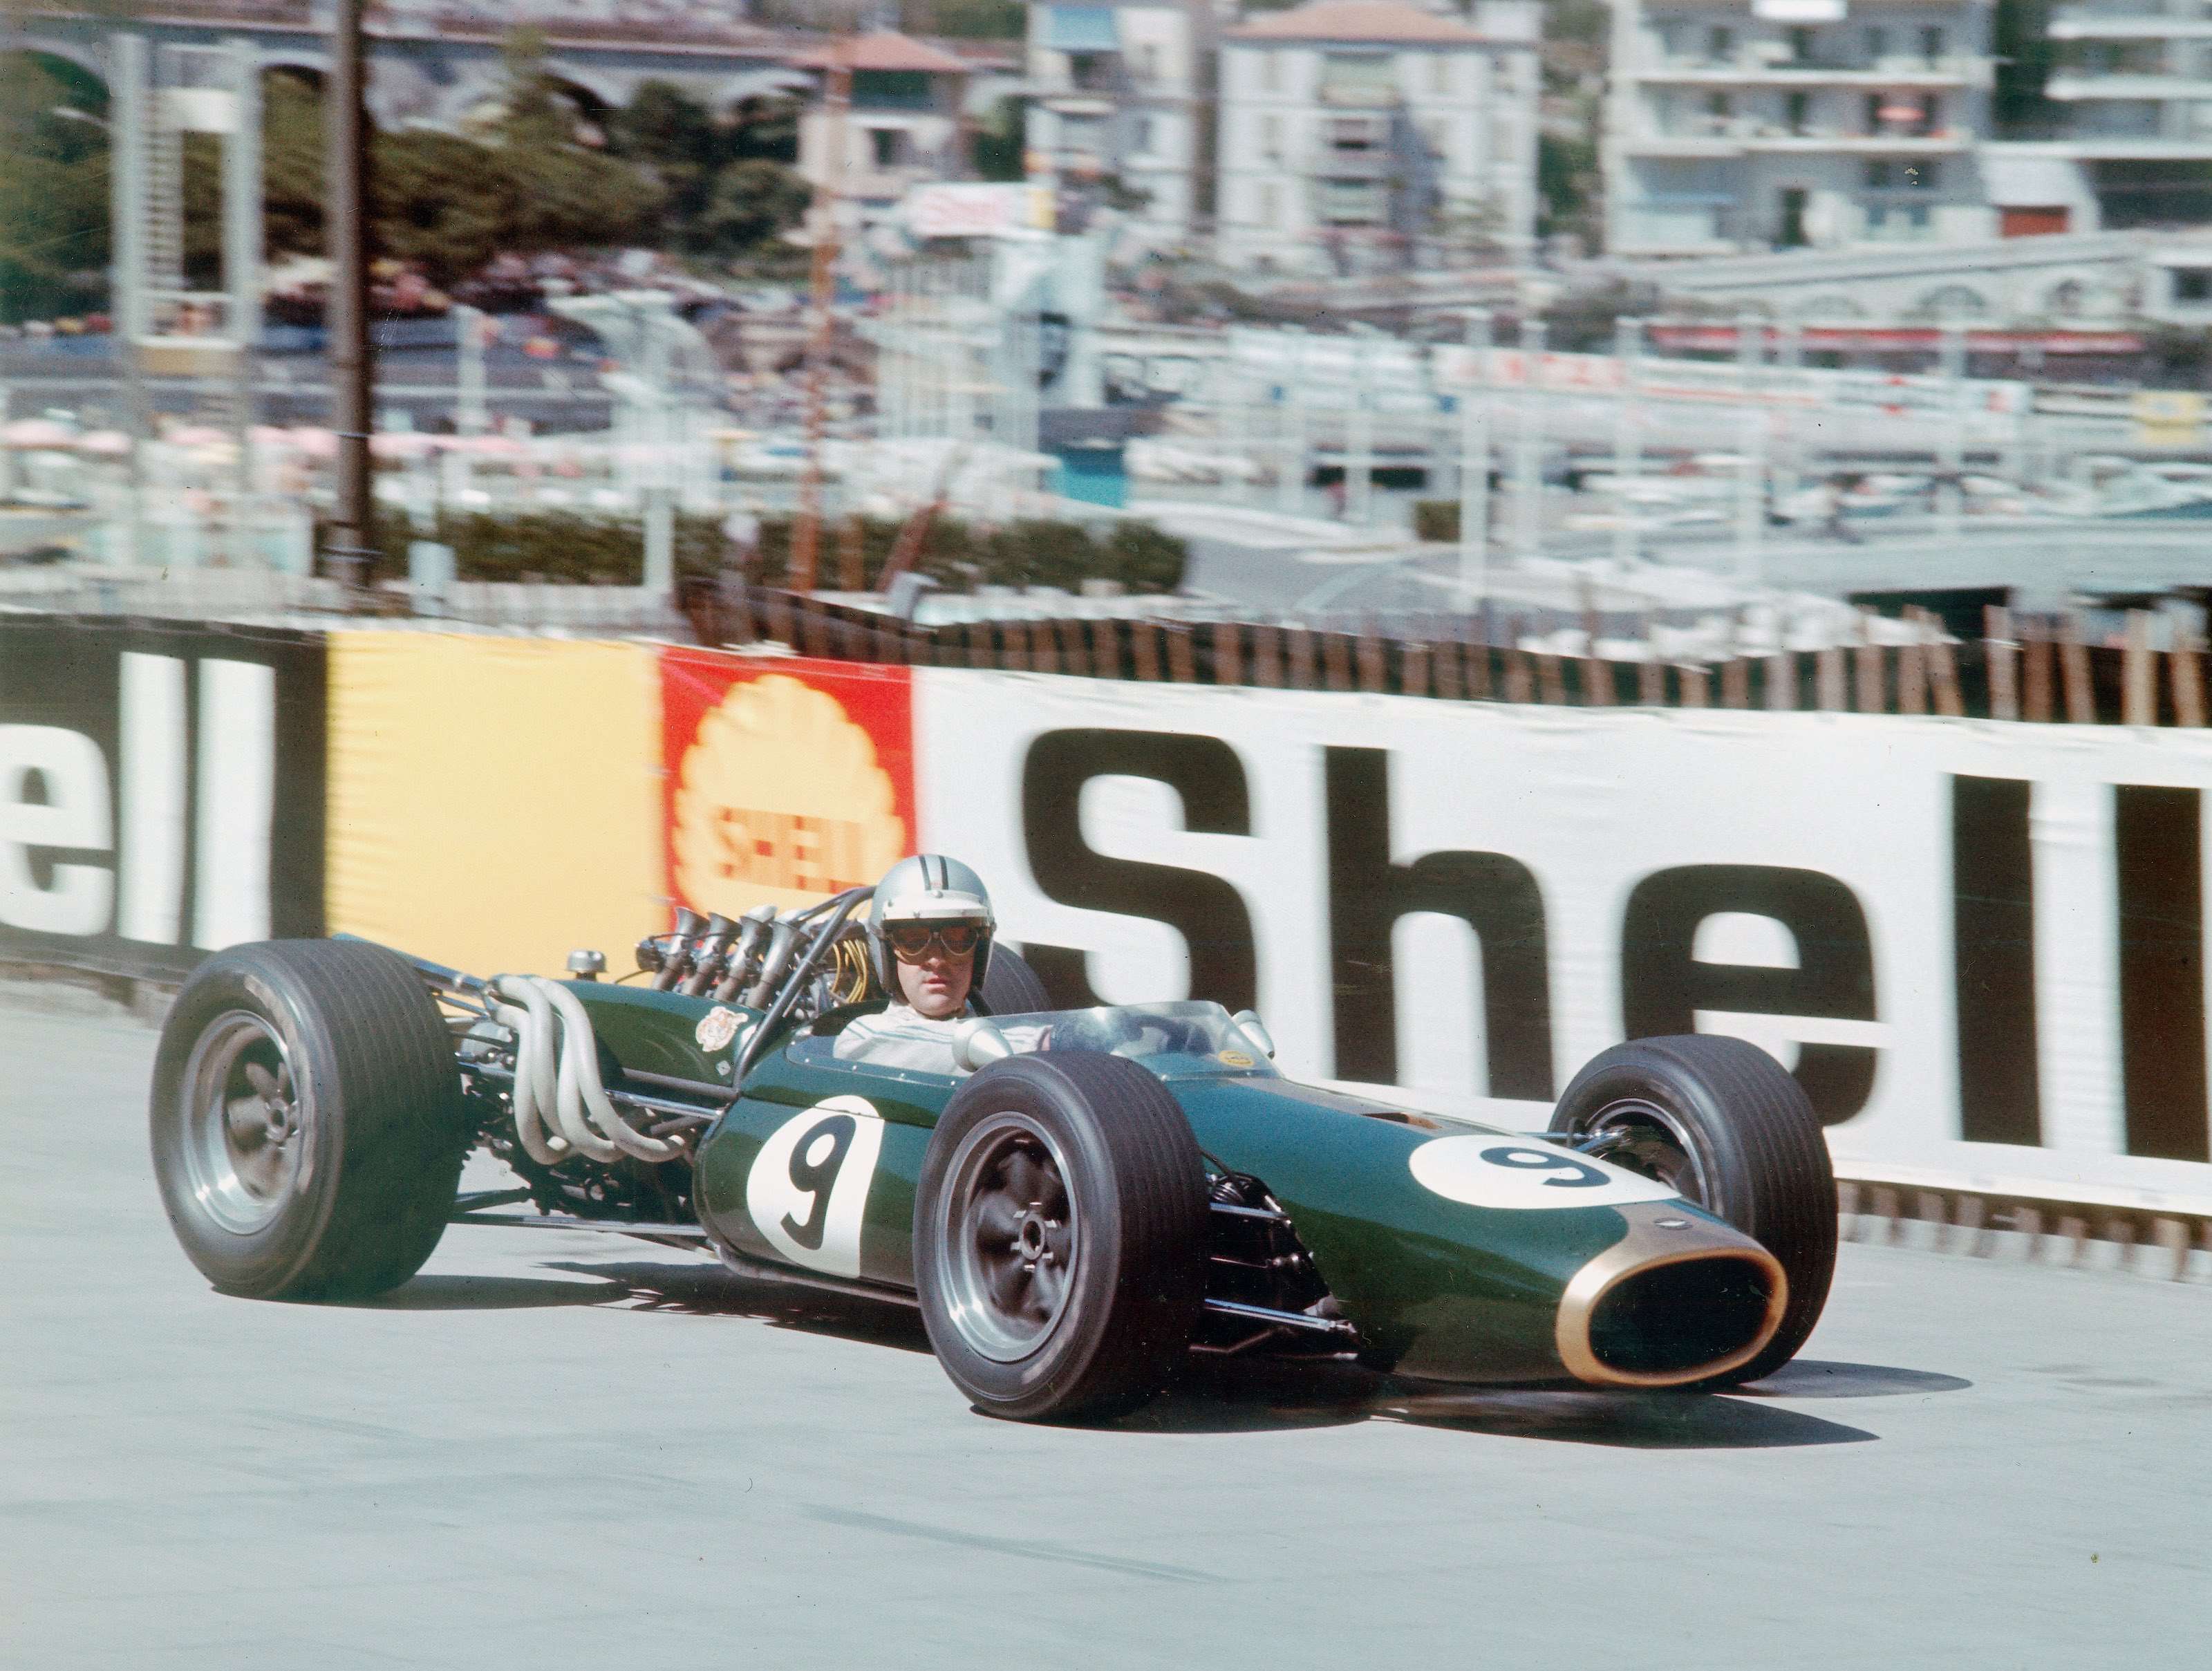 Denny would win the 1967 Monaco GP - 50 years ago - in this Brabham-Repco BT20 V8